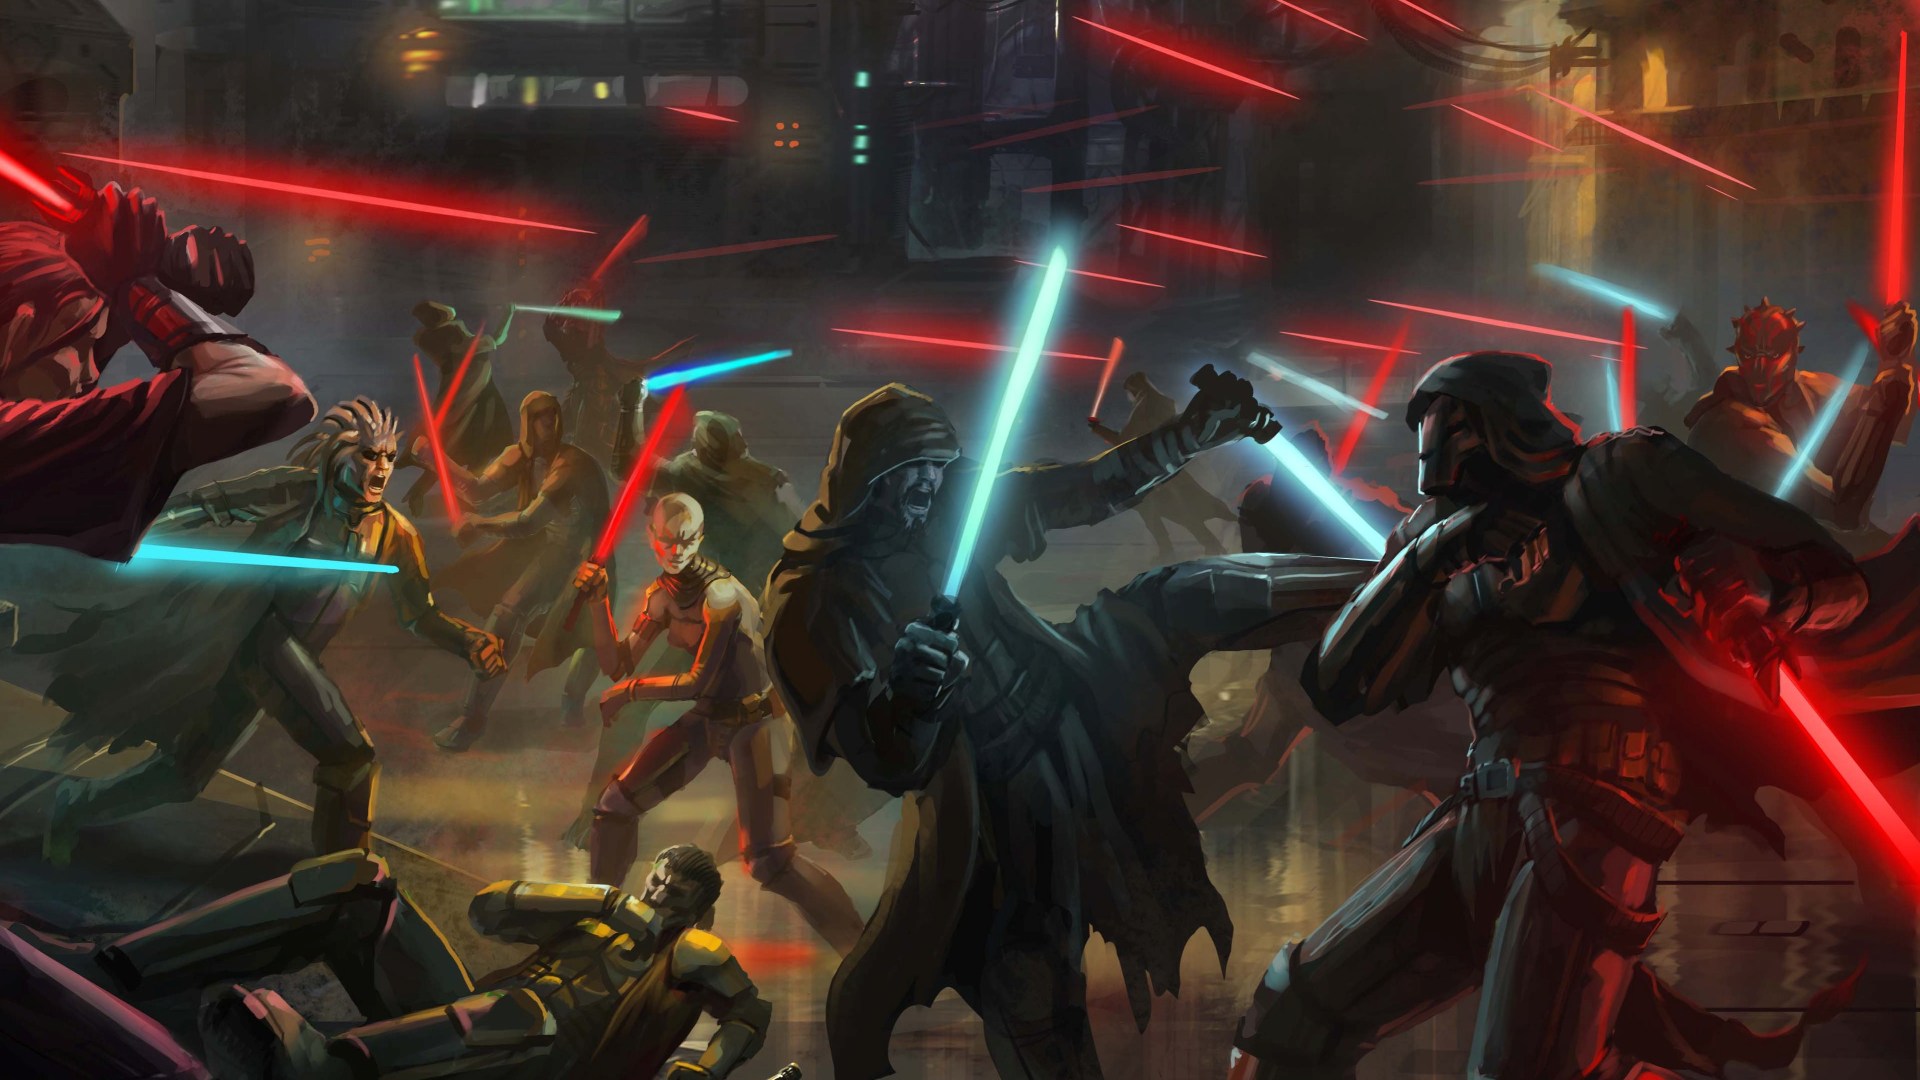 Star Wars Fight Wallpaper For Phones And Tablets